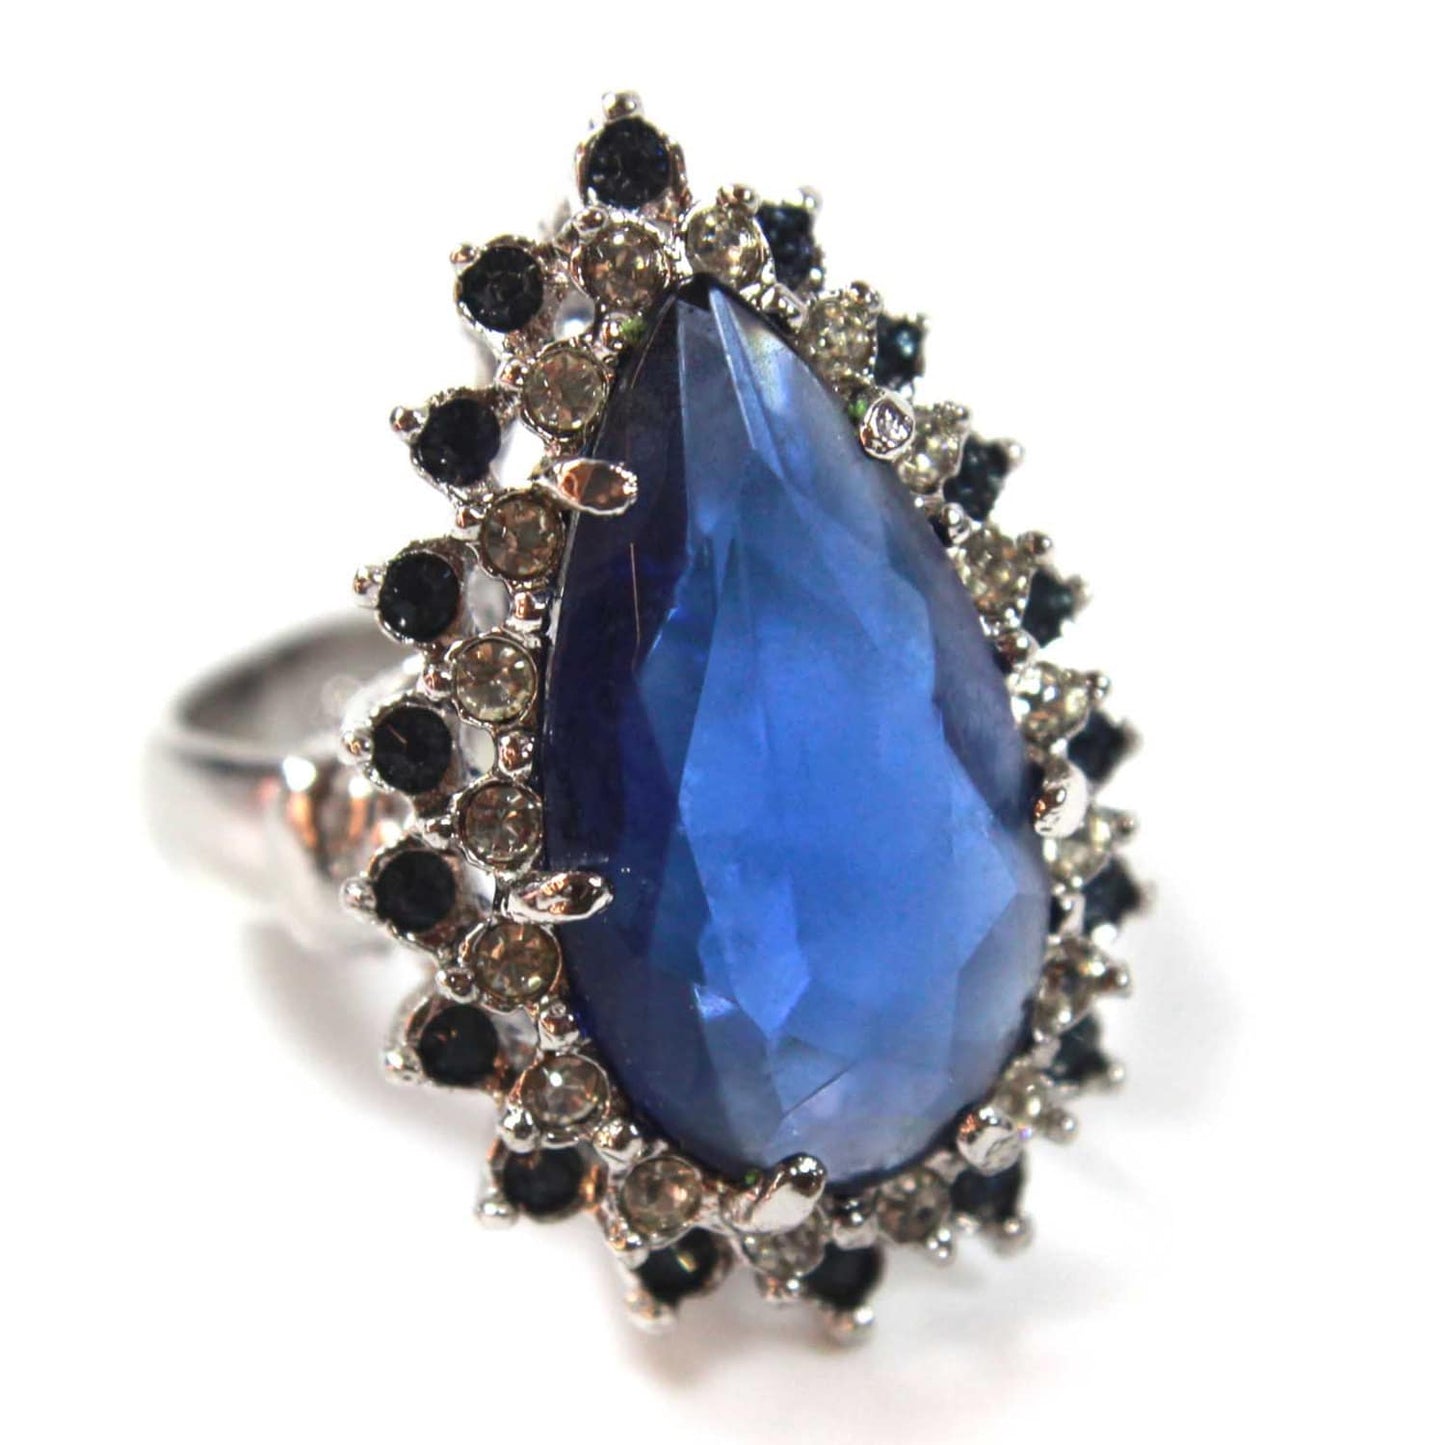 Vintage Ring Teardrop Ring Sapphire and Clear Swarovski Crystals 18k White Gold Silver  #R212 - Limited Stock - Never Worn